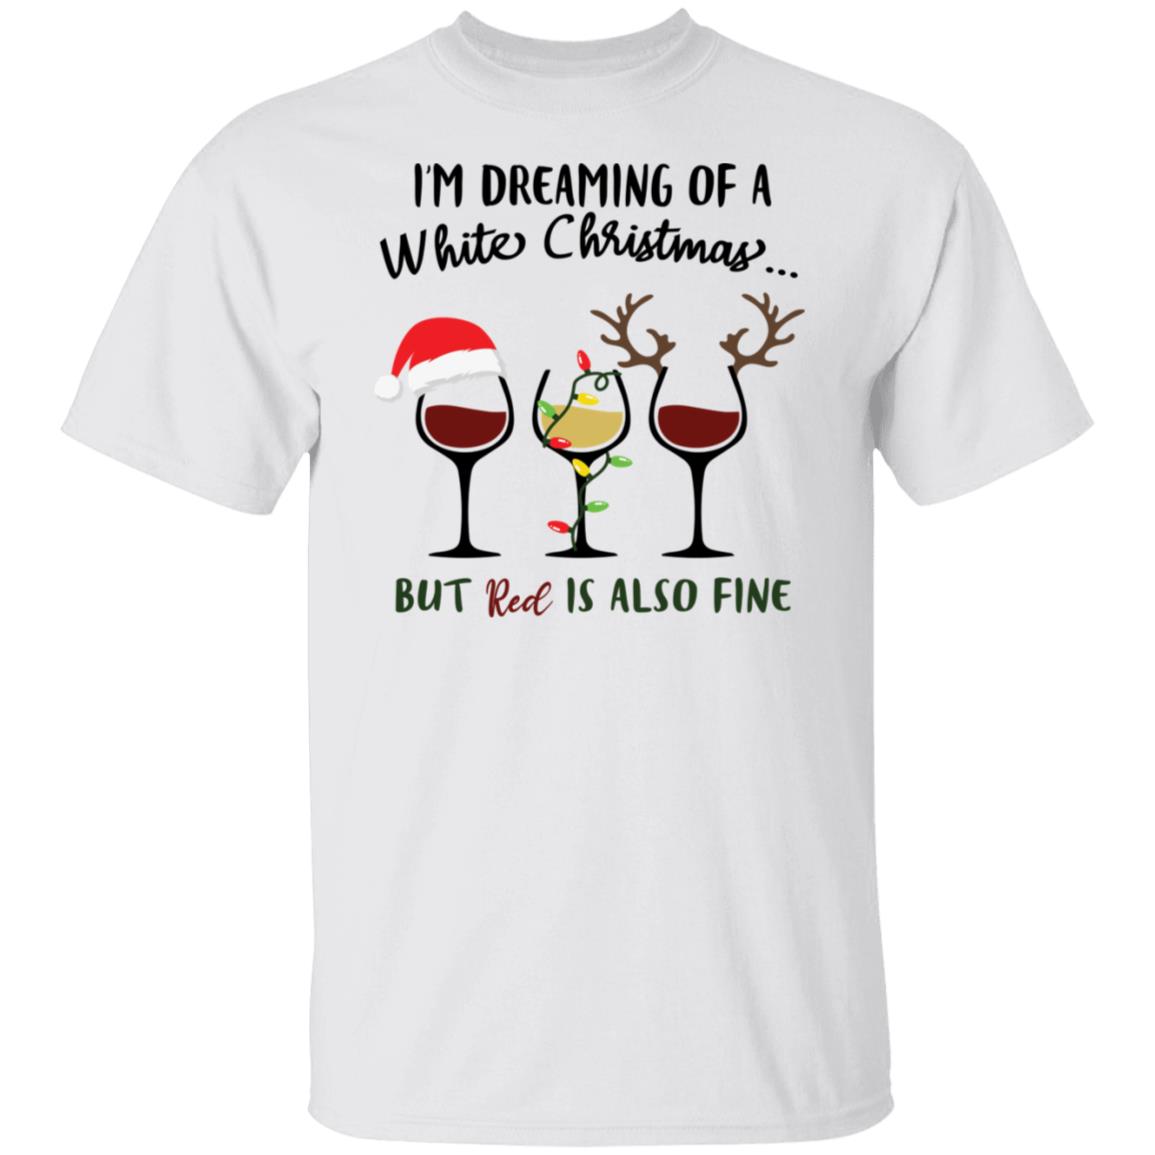 I'm Dreaming of a White Christmas but Red is also fine Christmas Shirt